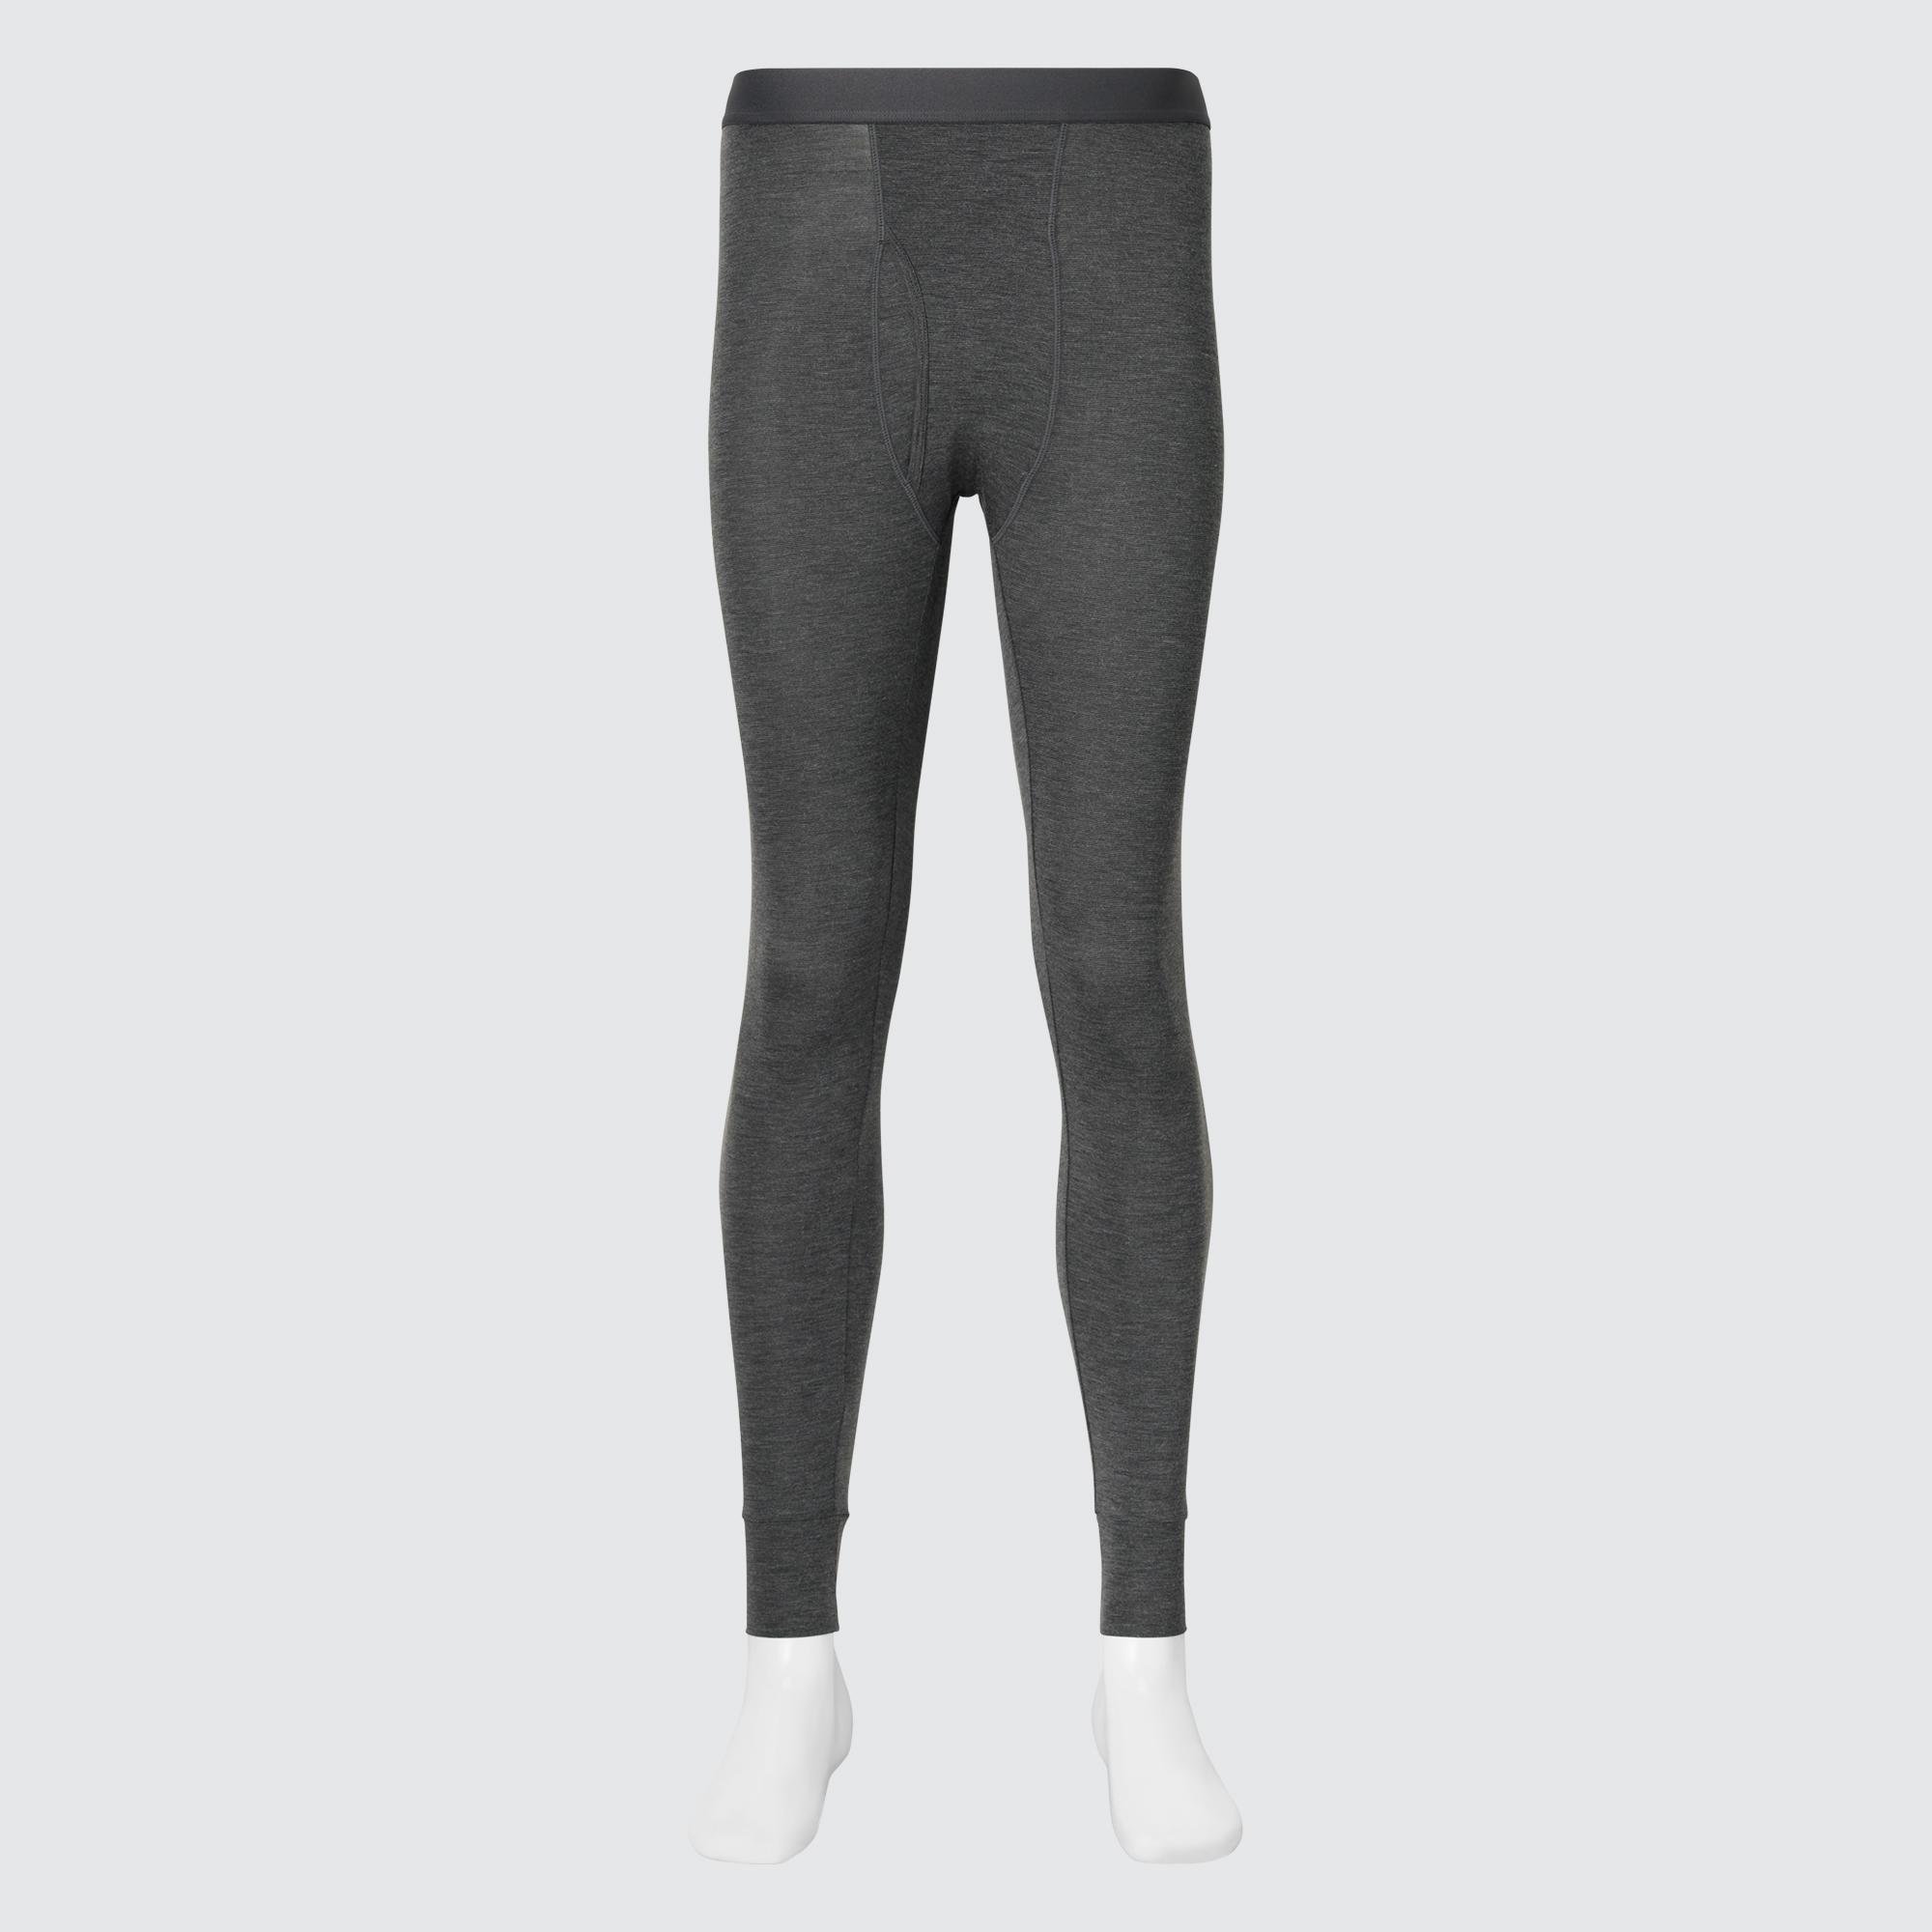 HEATTECH Tights by UNIQLO